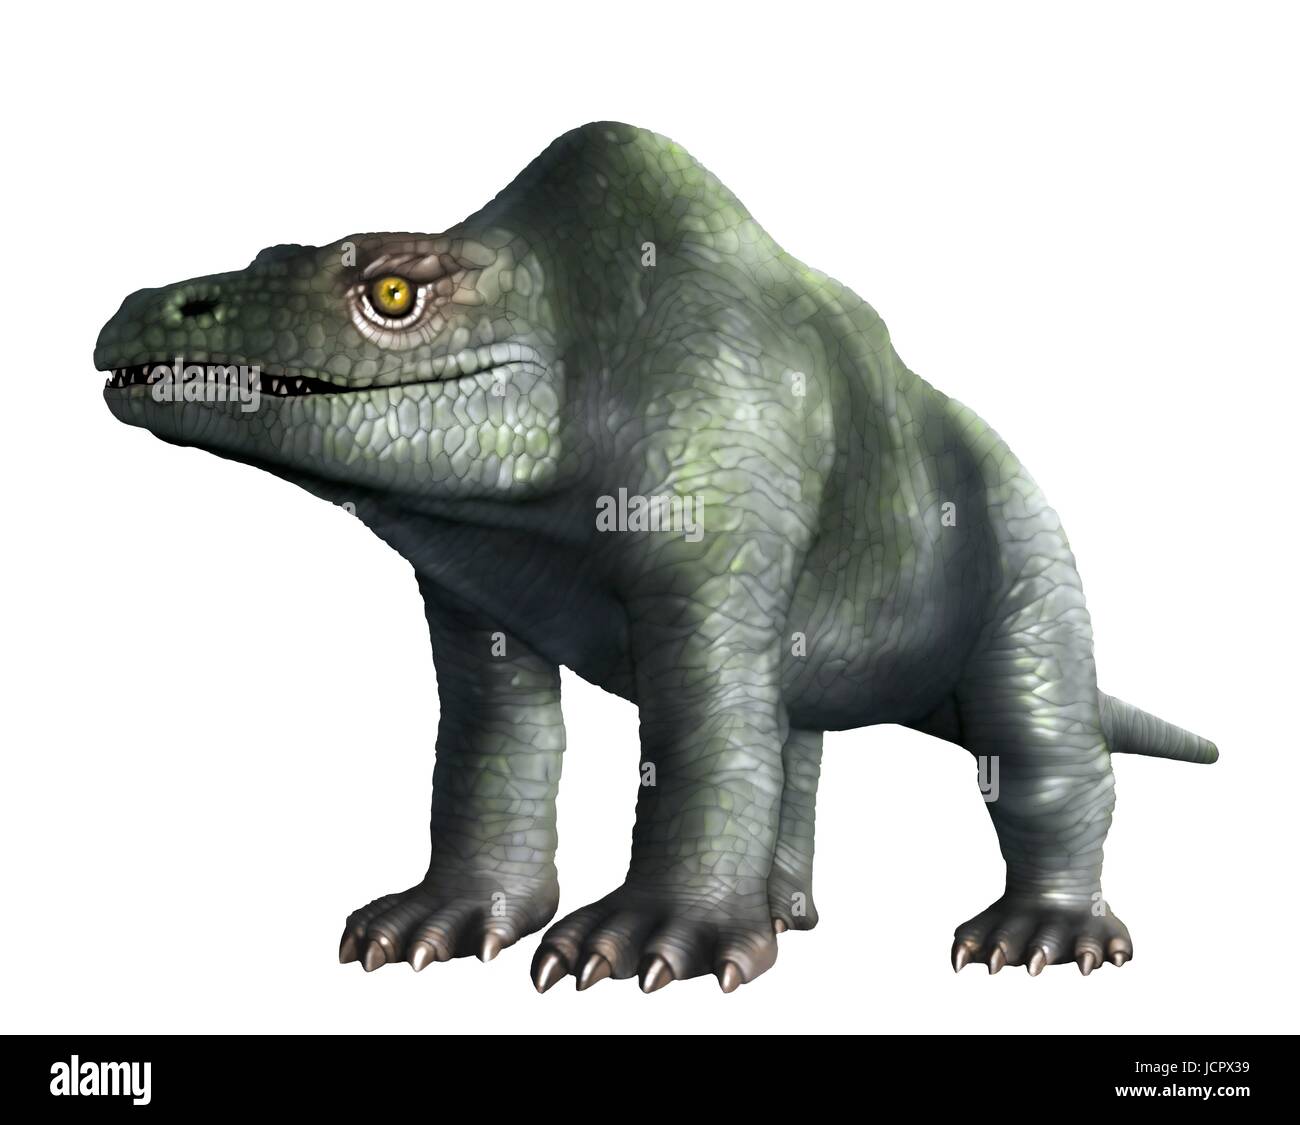 Megalosaurus is genus extinct meat-eating dinosaurs,theropods,from Middle  Jurassic period in Earth's history,166 million years  lived in what  is now southern  first dinosaur fossil ever found,as long ago as  1676,was probably